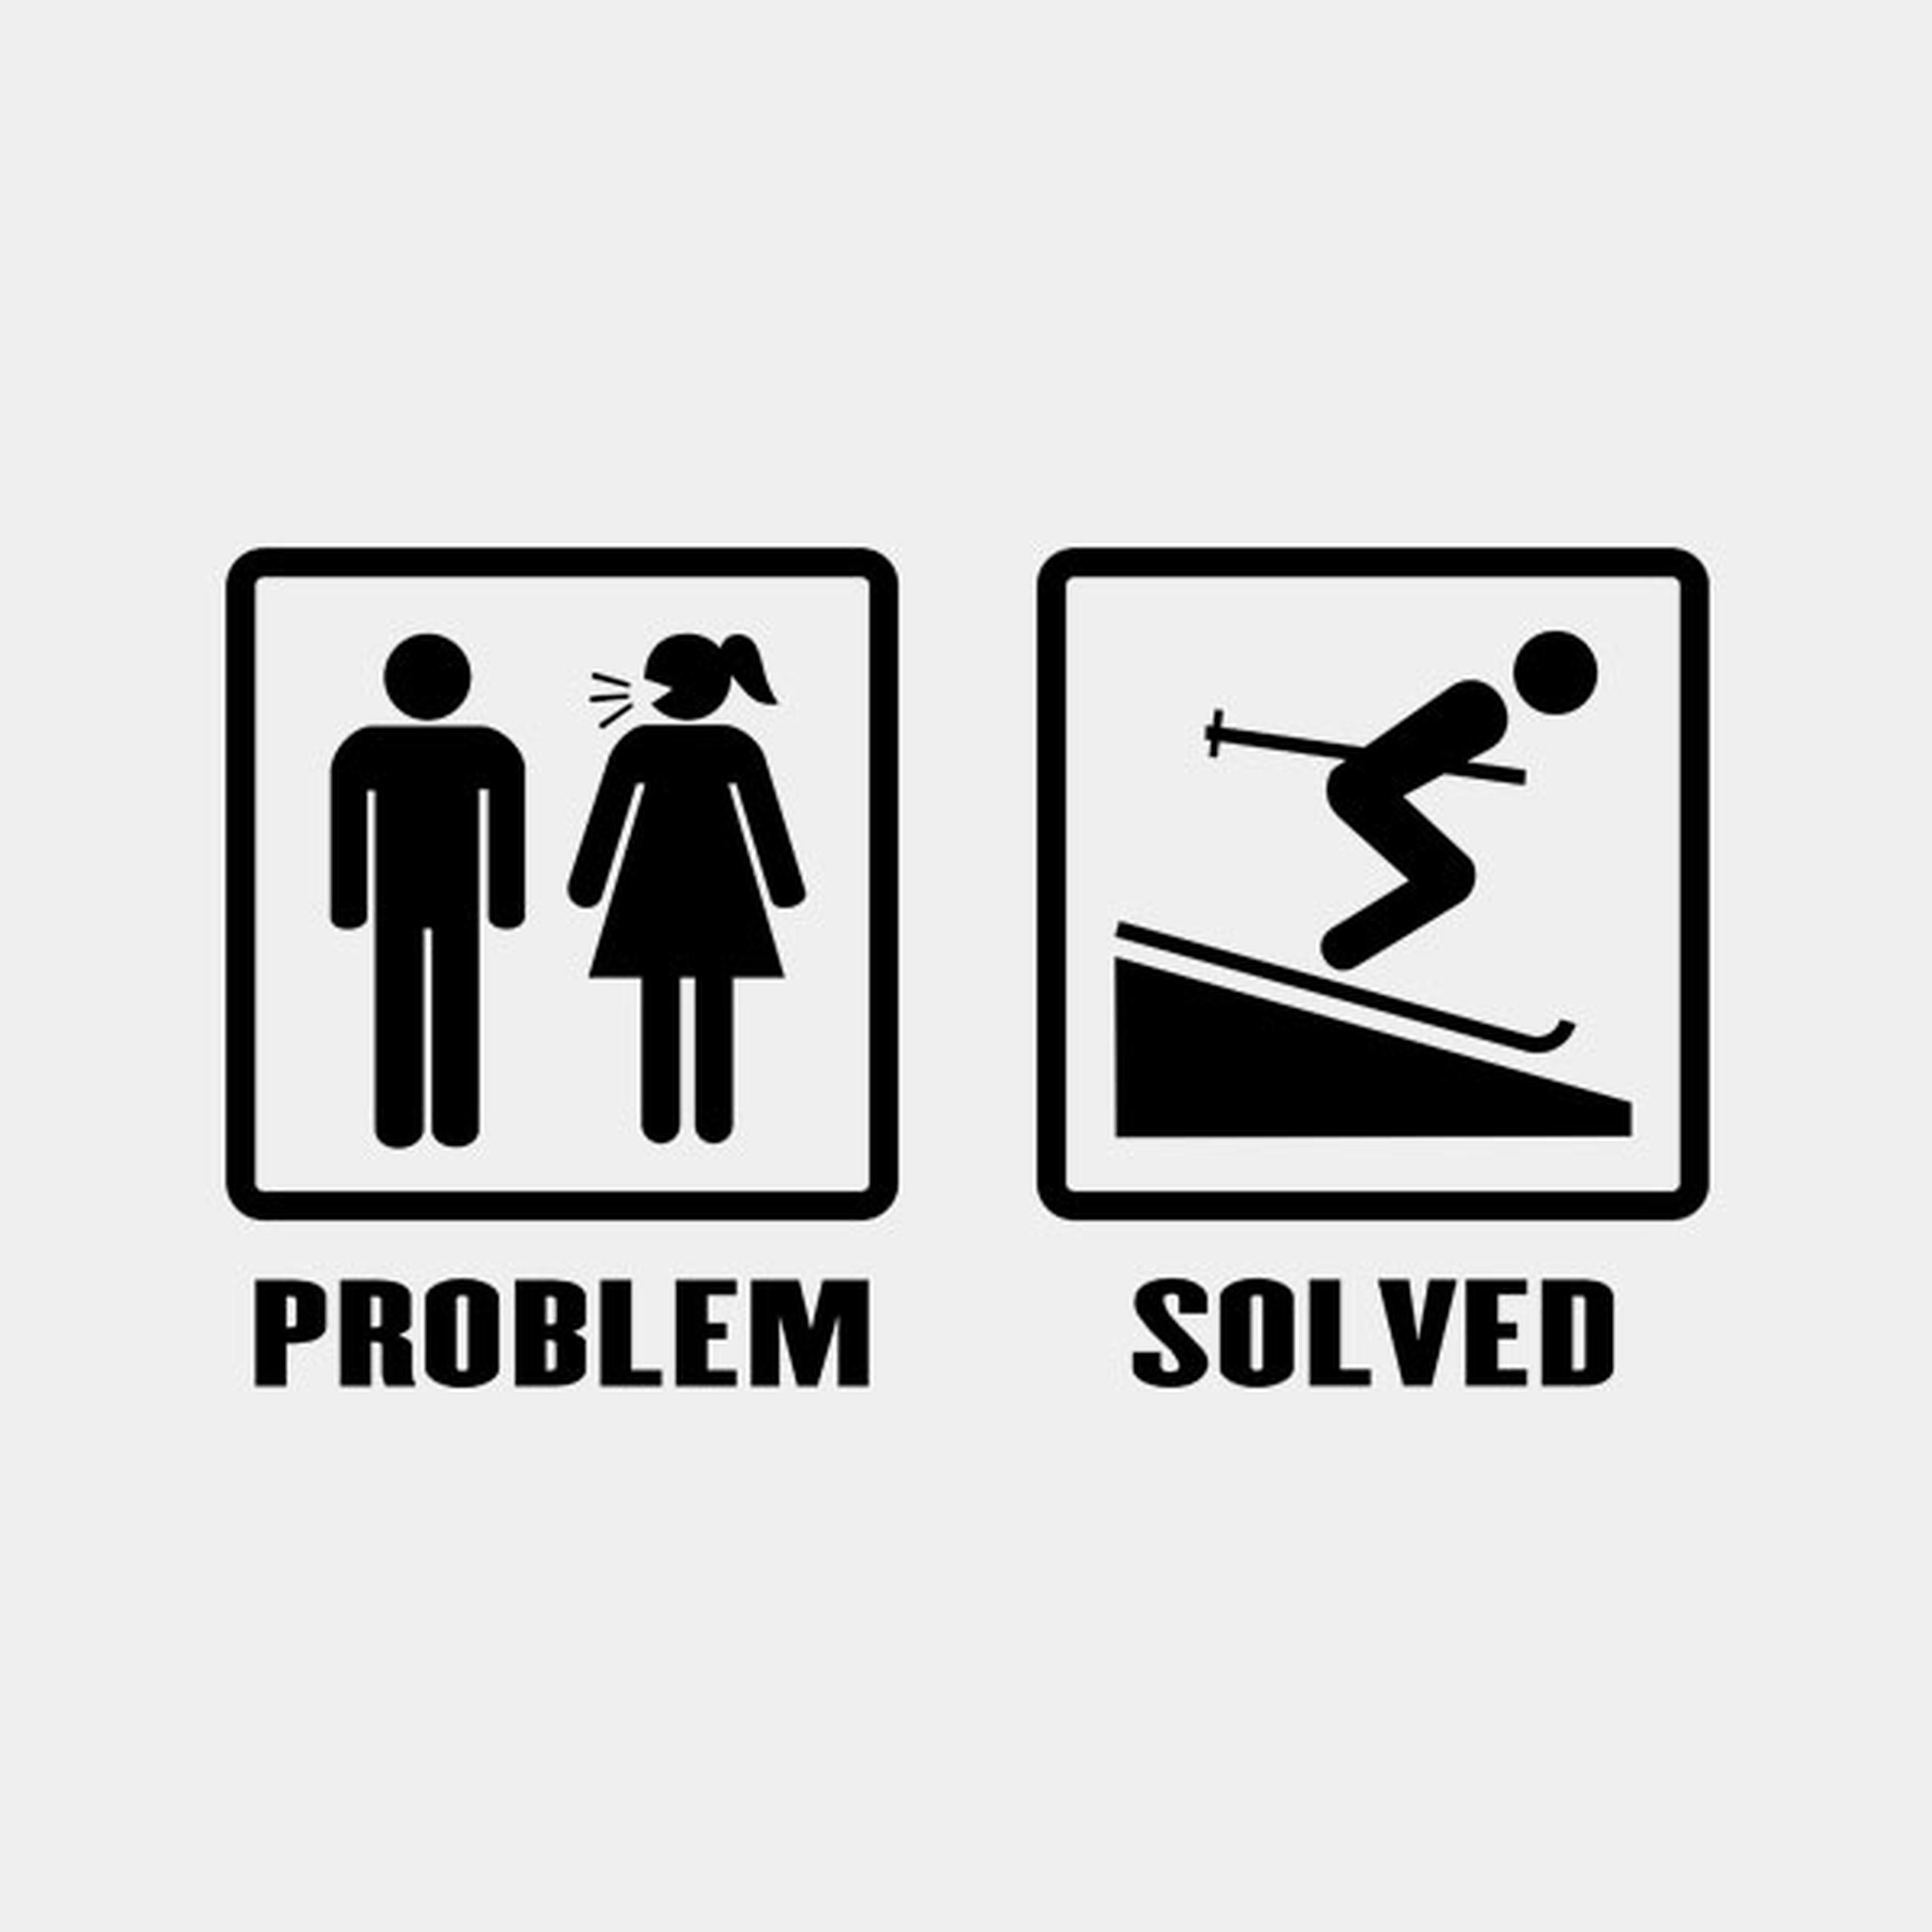 Problem - Solved (Skiing) - T-shirt